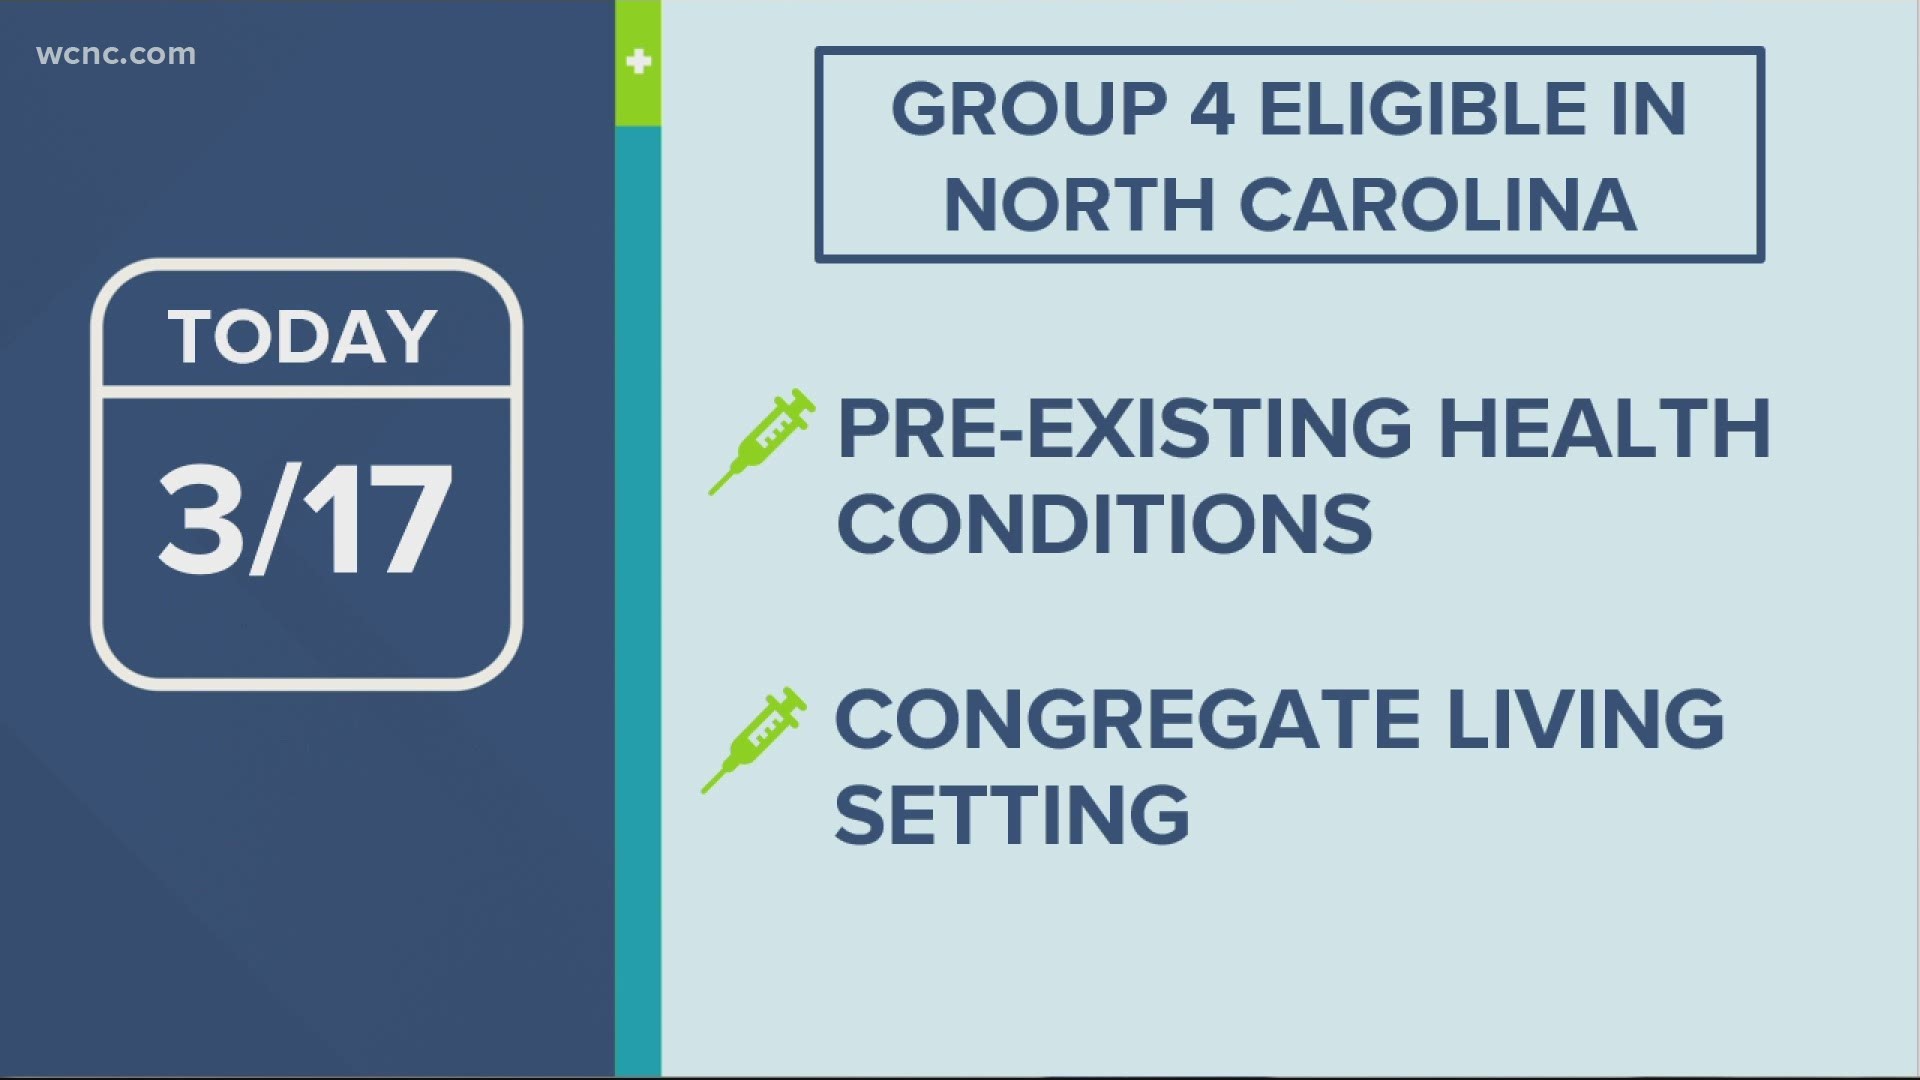 North Carolina pharmacies and health care providers will begin taking appointments for Group 4 COVID-19 vaccinations Wednesday. Here's who is eligible for the shot.